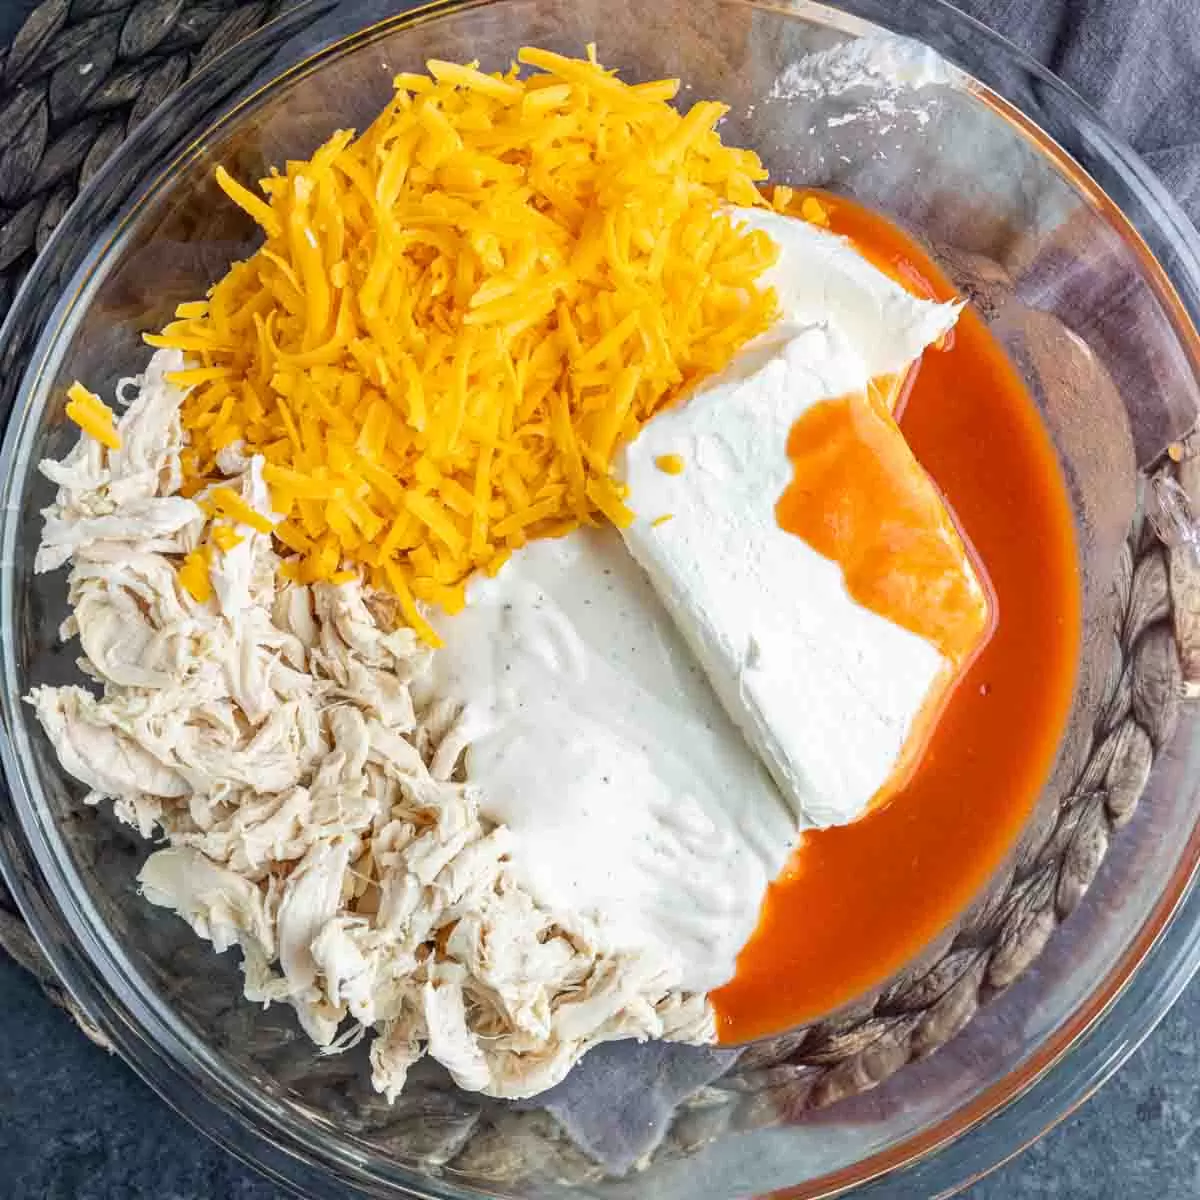 Oven Buffalo Chicken Dip ingredients in a glass bowl